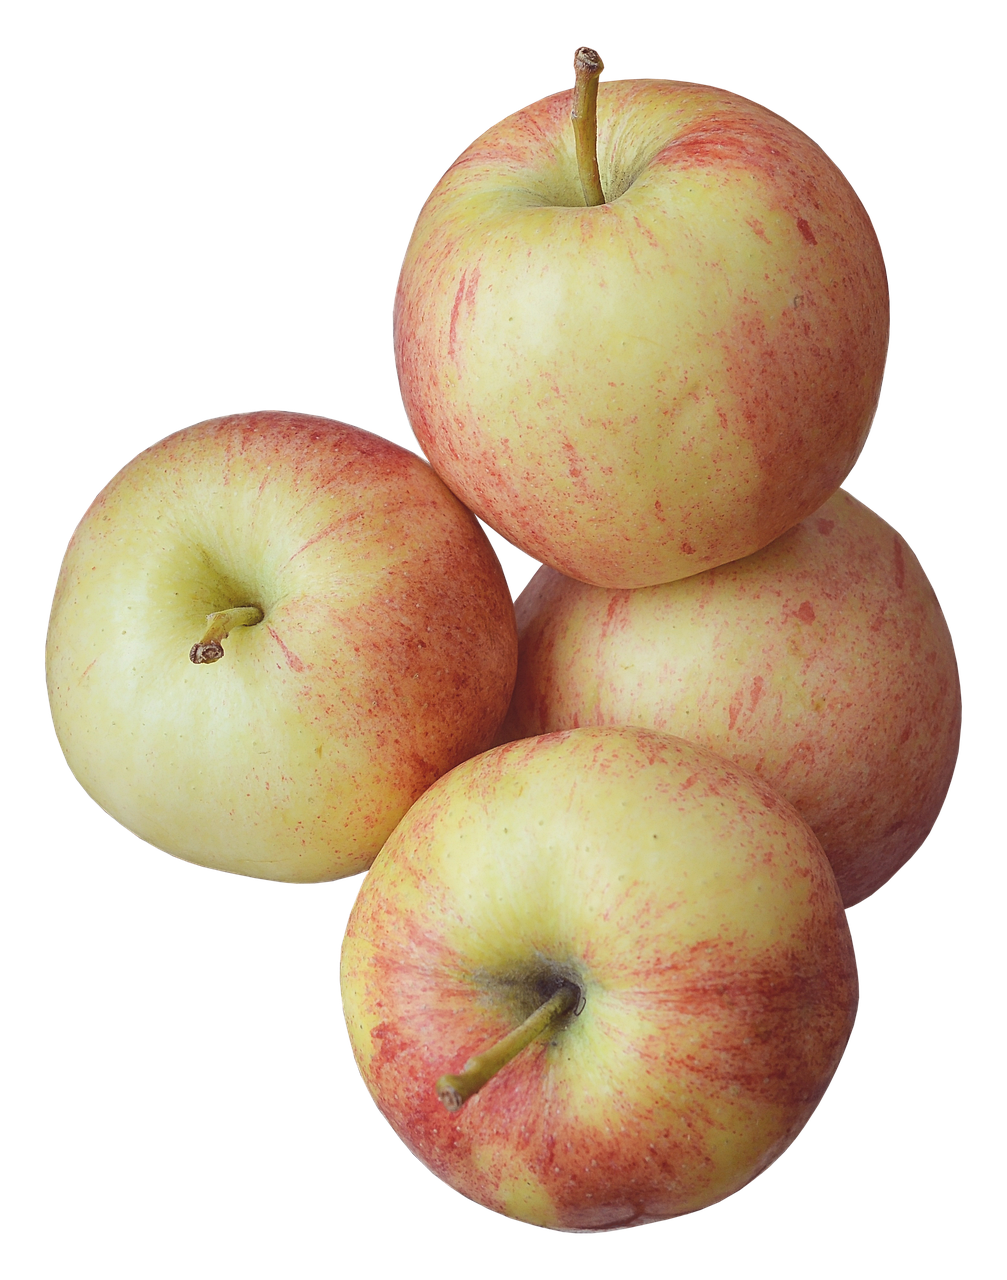 A Group Of Apples On A Black Background